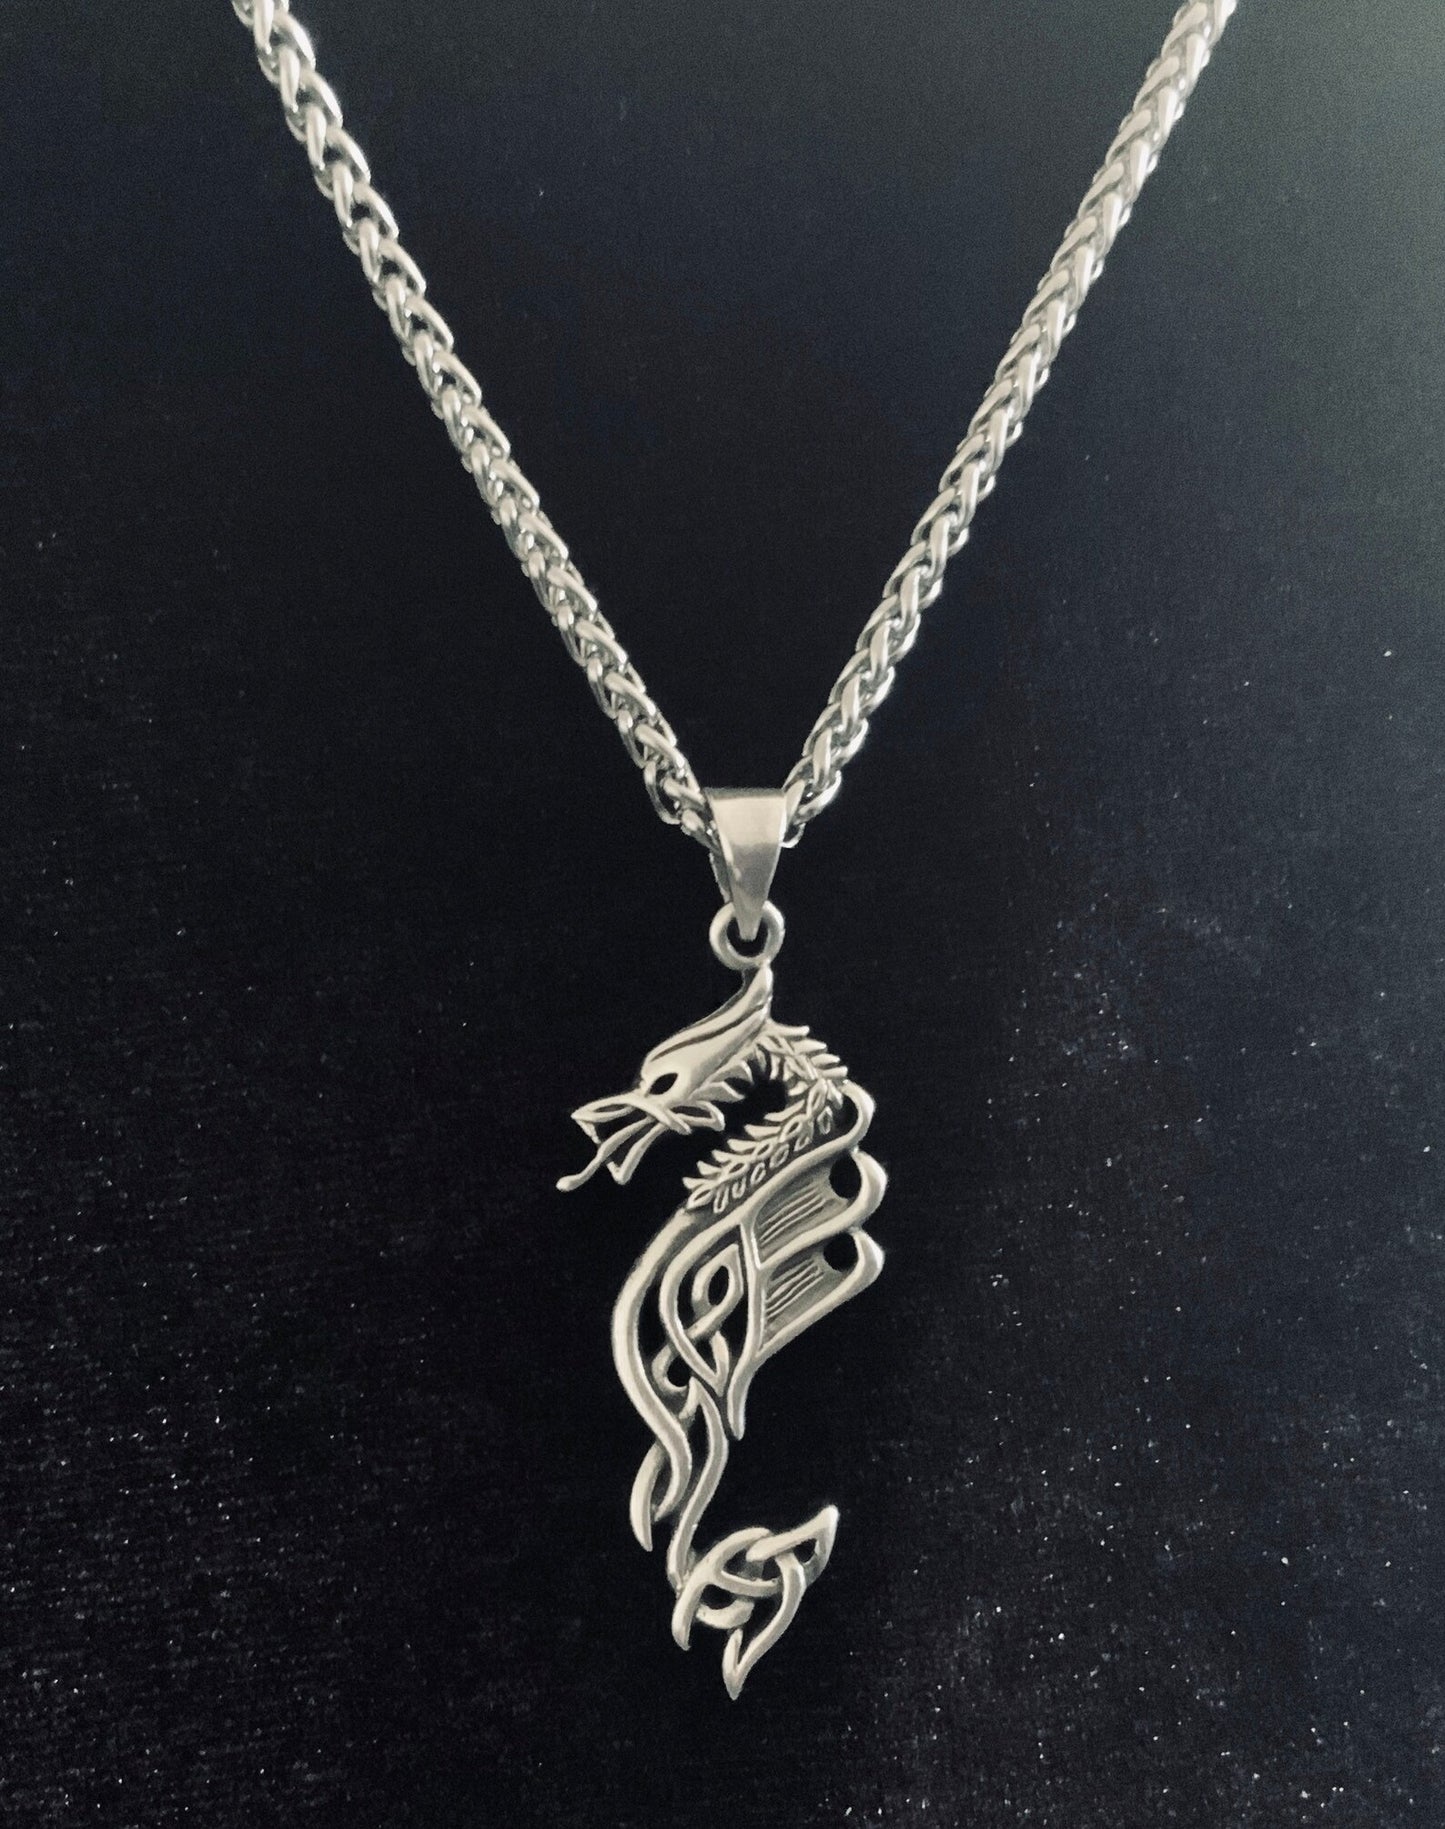 Large Handcast 925 Sterling Silver Celtic Dragon Pendant Necklace + Free Chain